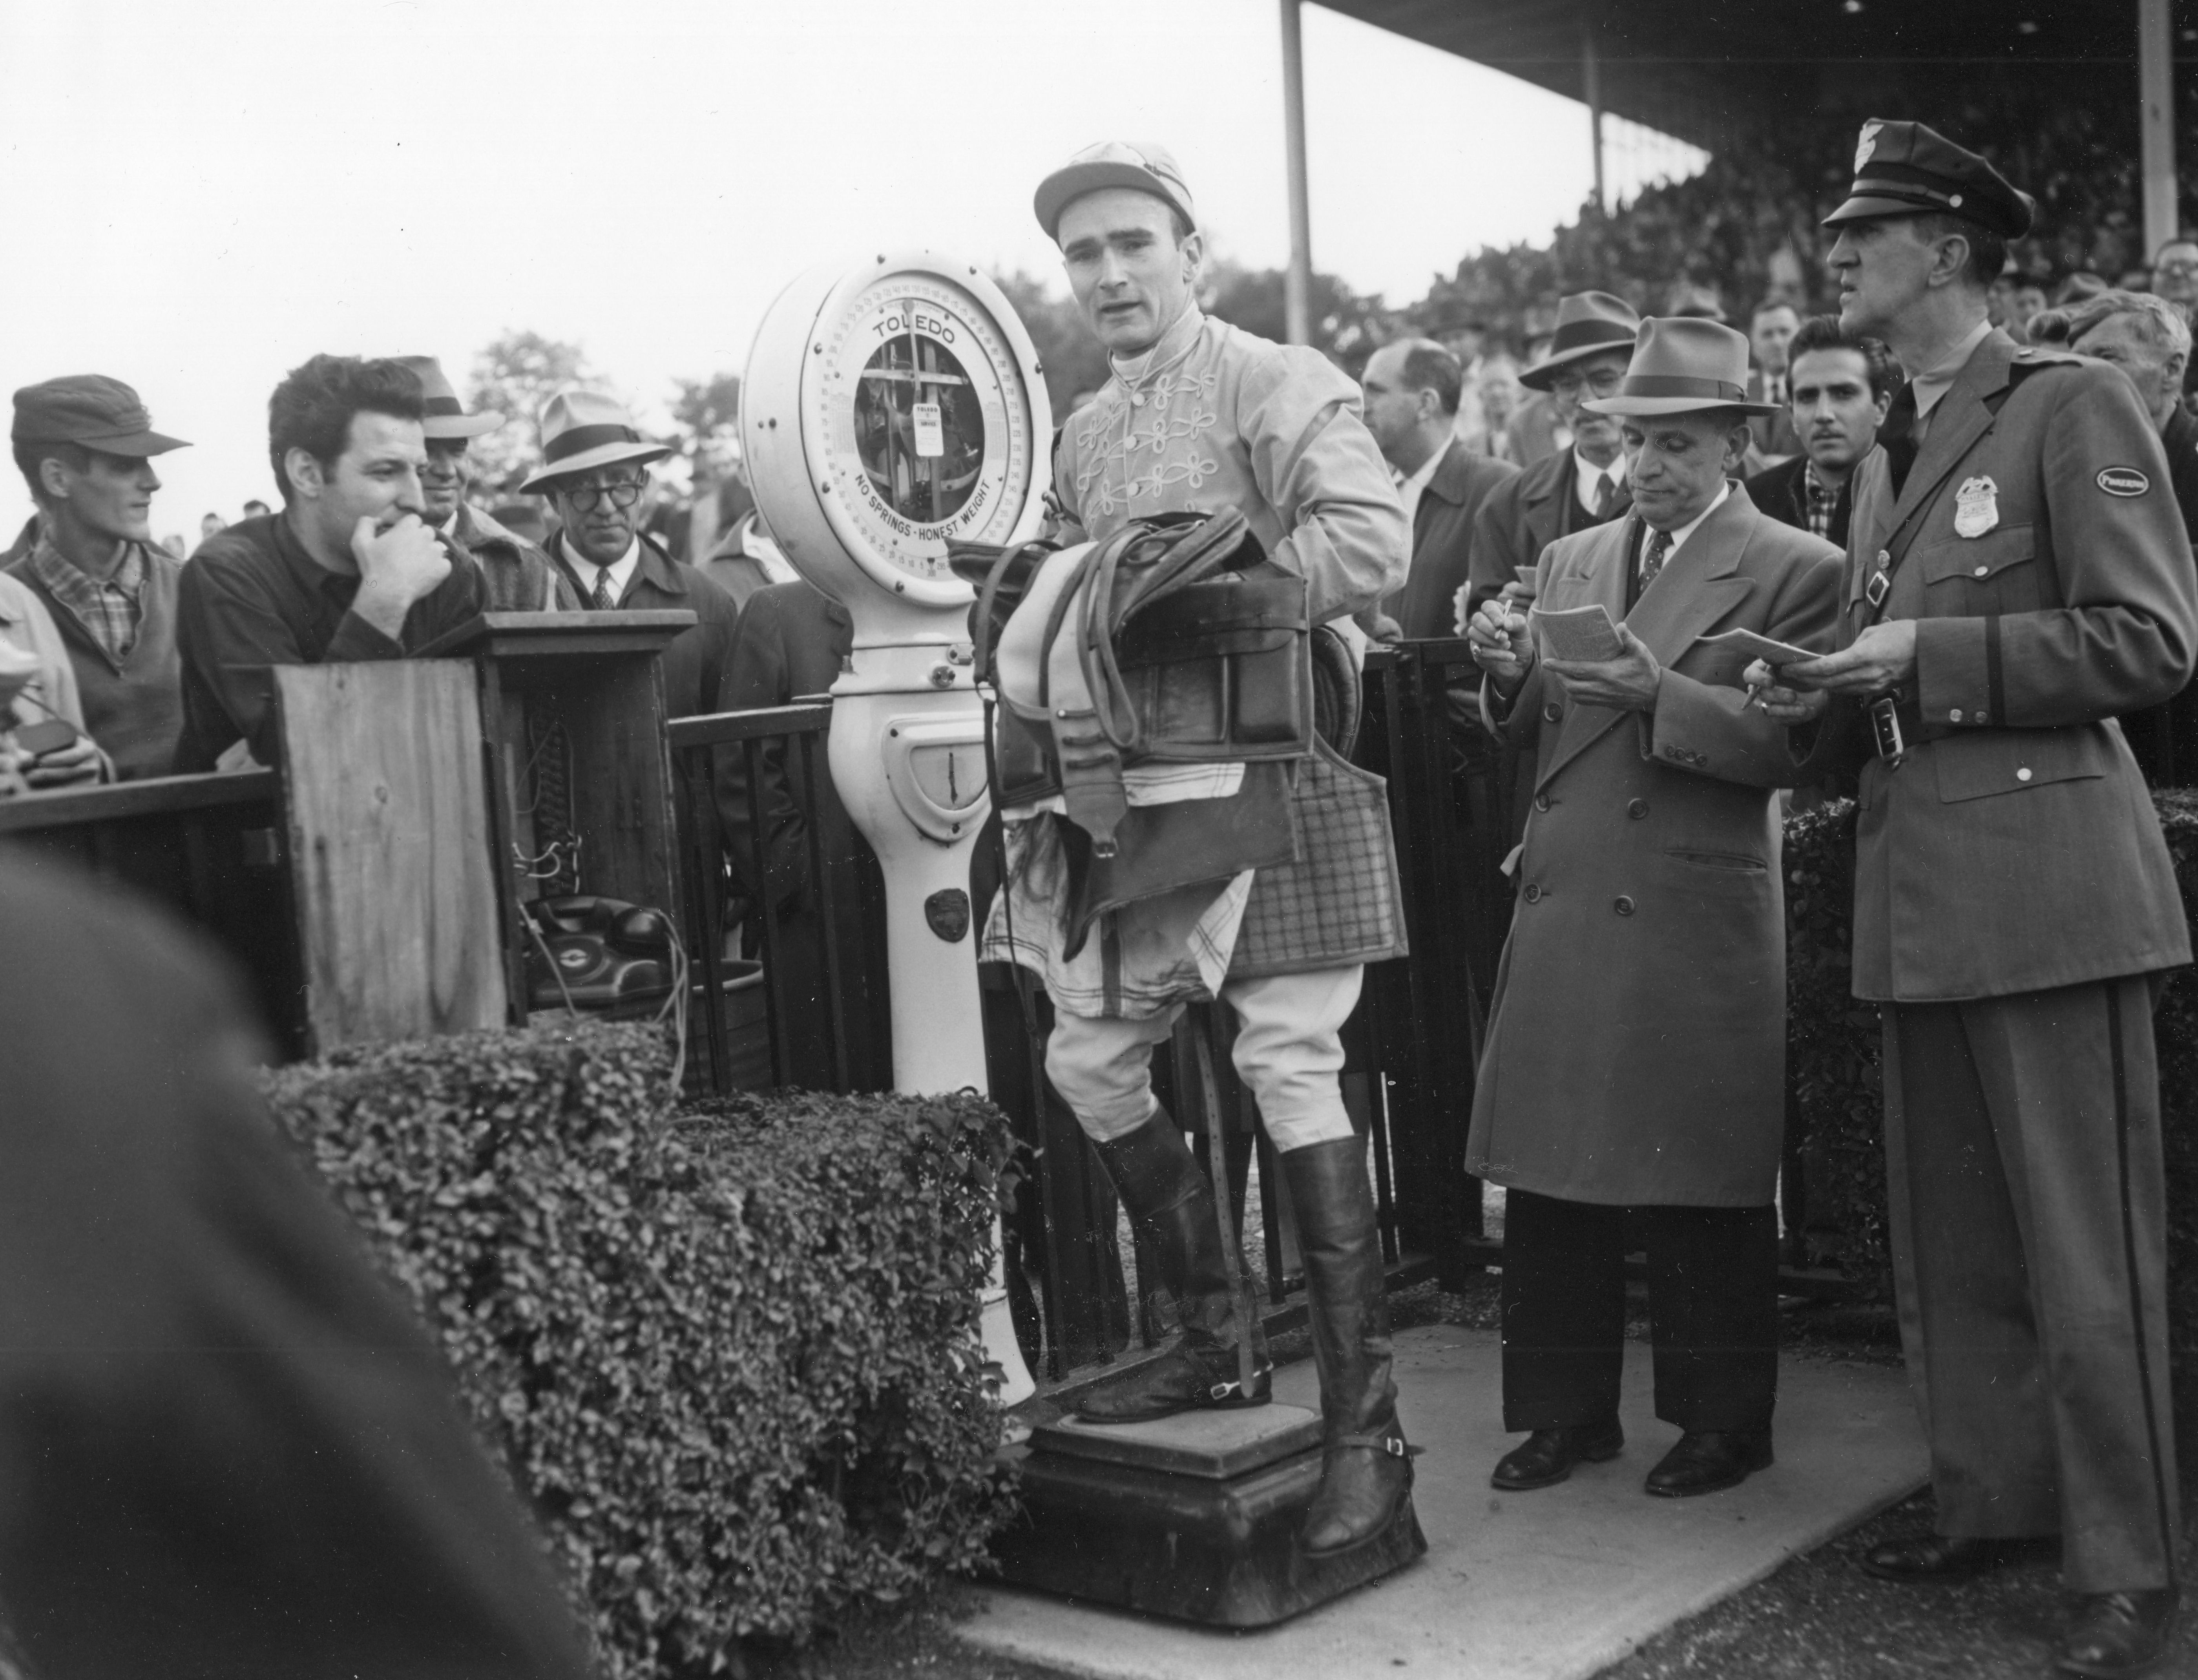 Frank Dooley Adams weighing in after a race at Belmont Park, October 1955 (Keeneland Library Morgan Collection/Museum Collection)